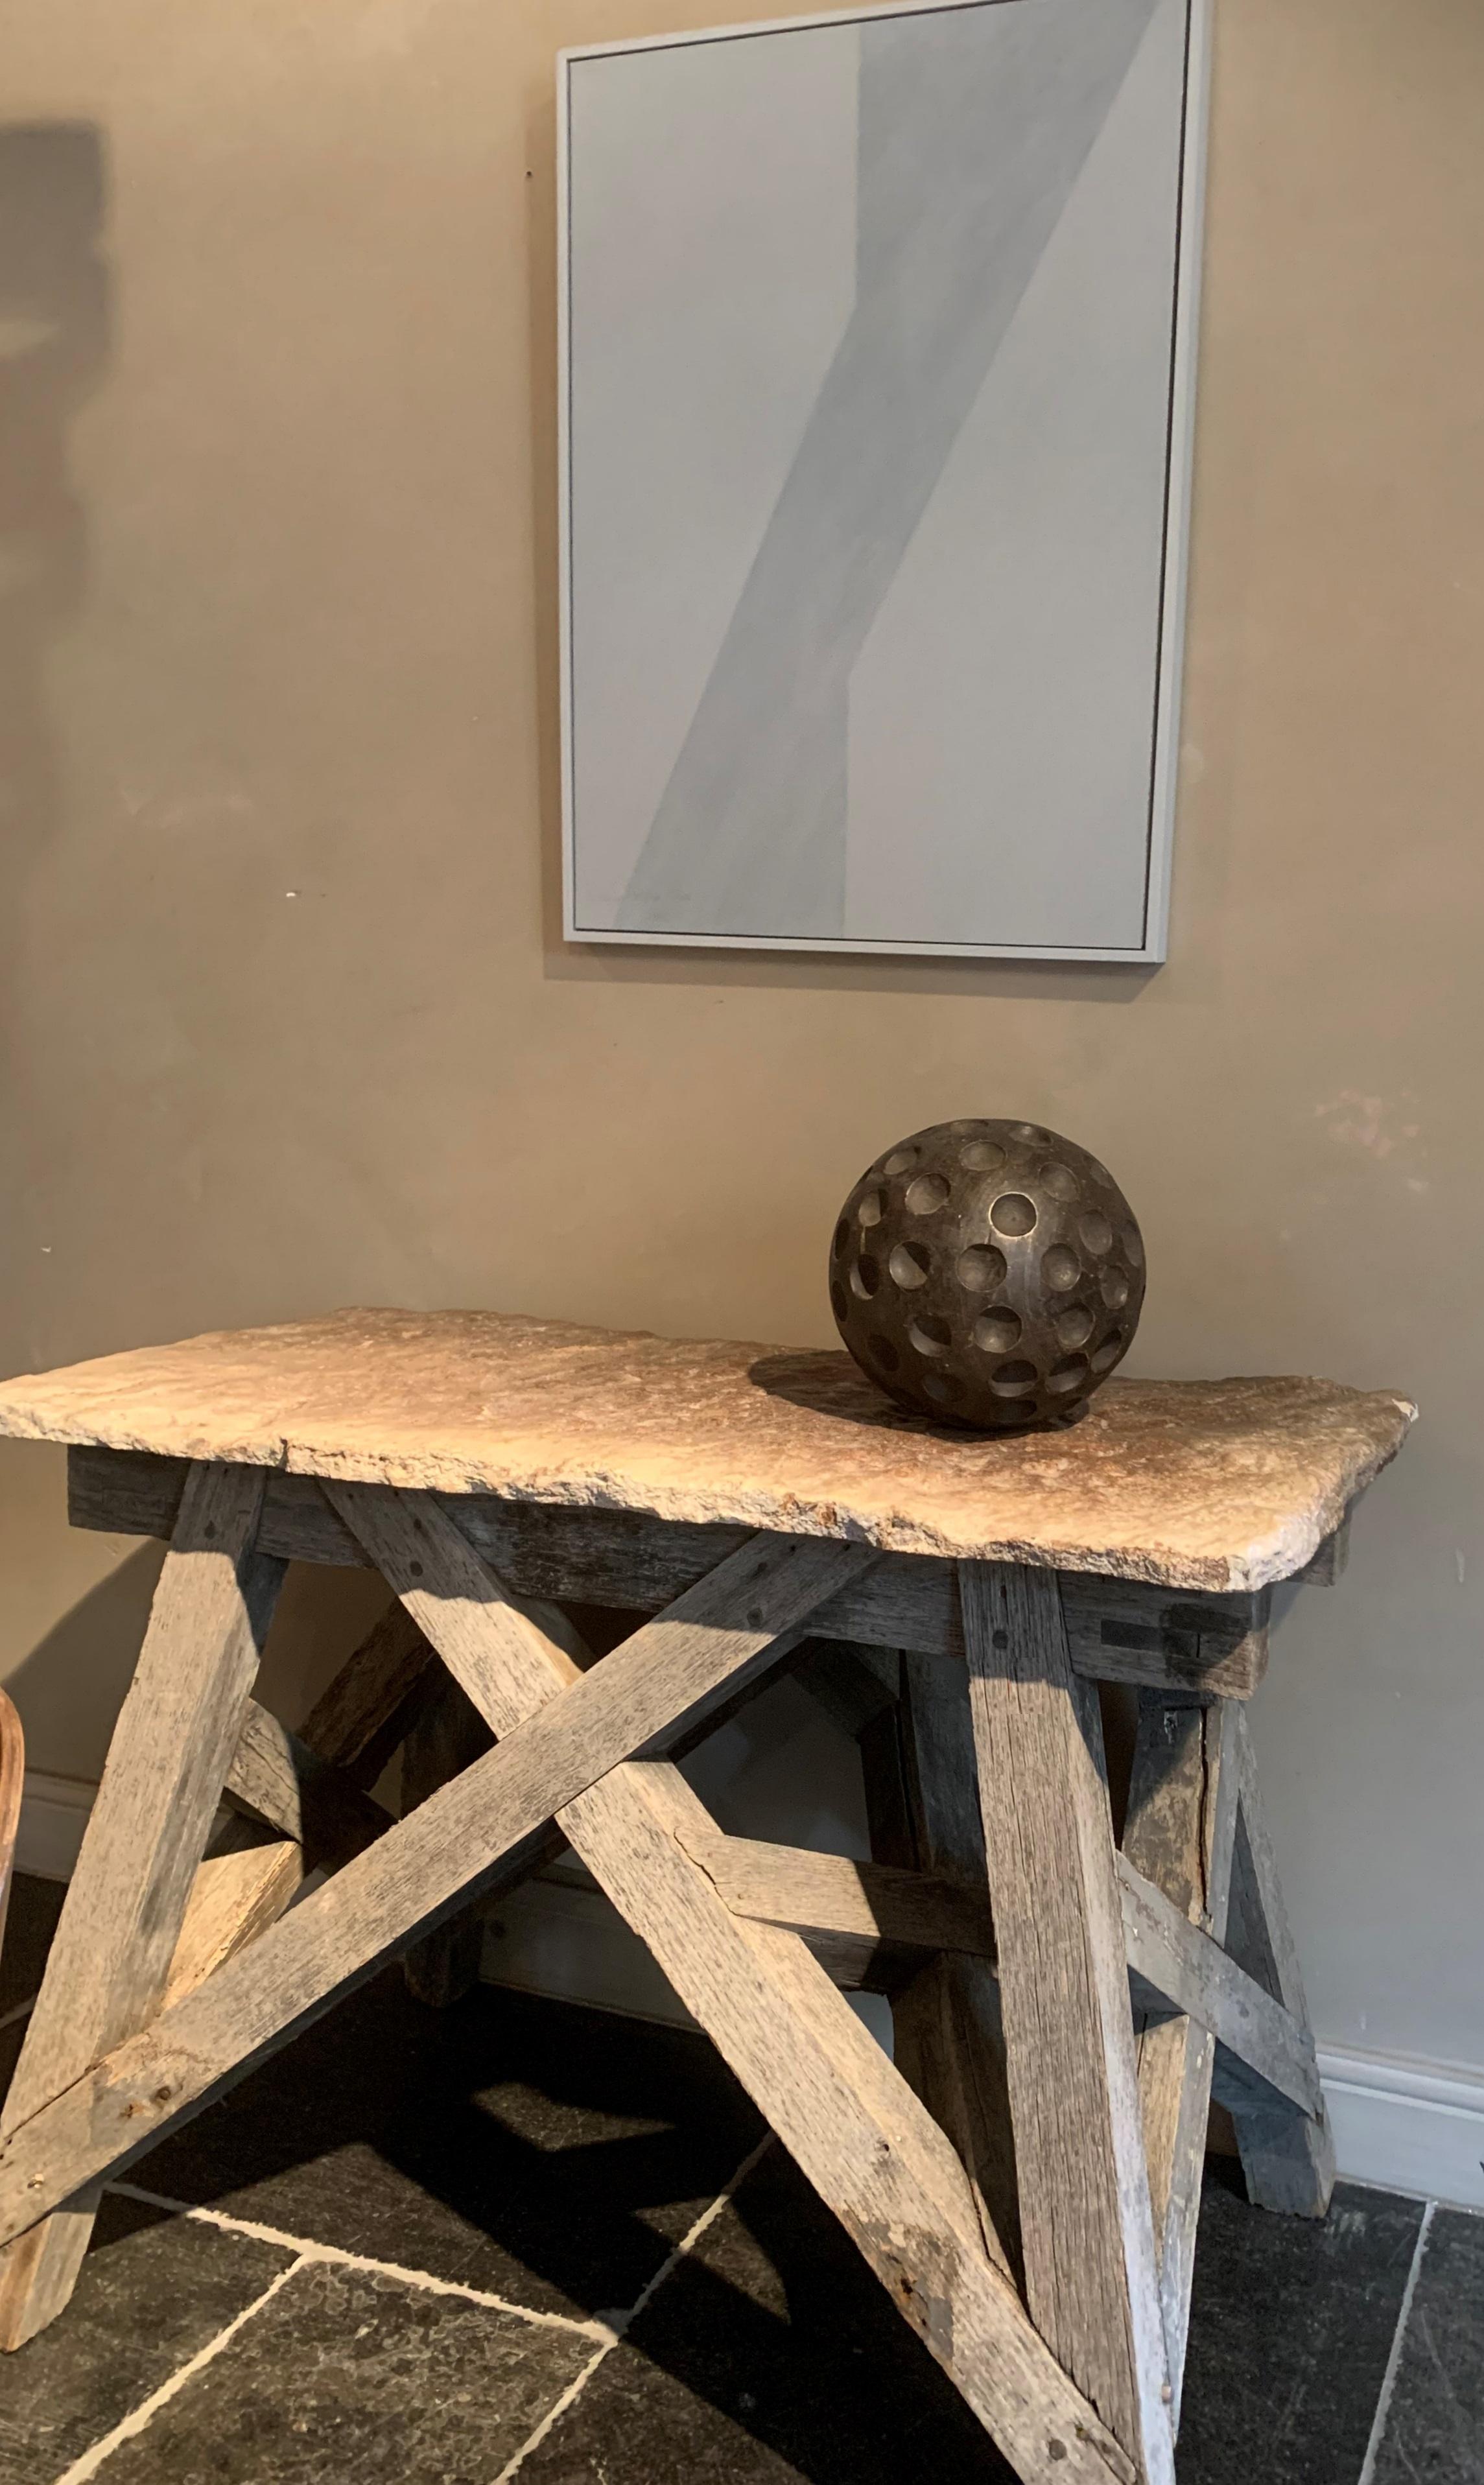 Hand-Crafted Brutalist Wooden Spheres